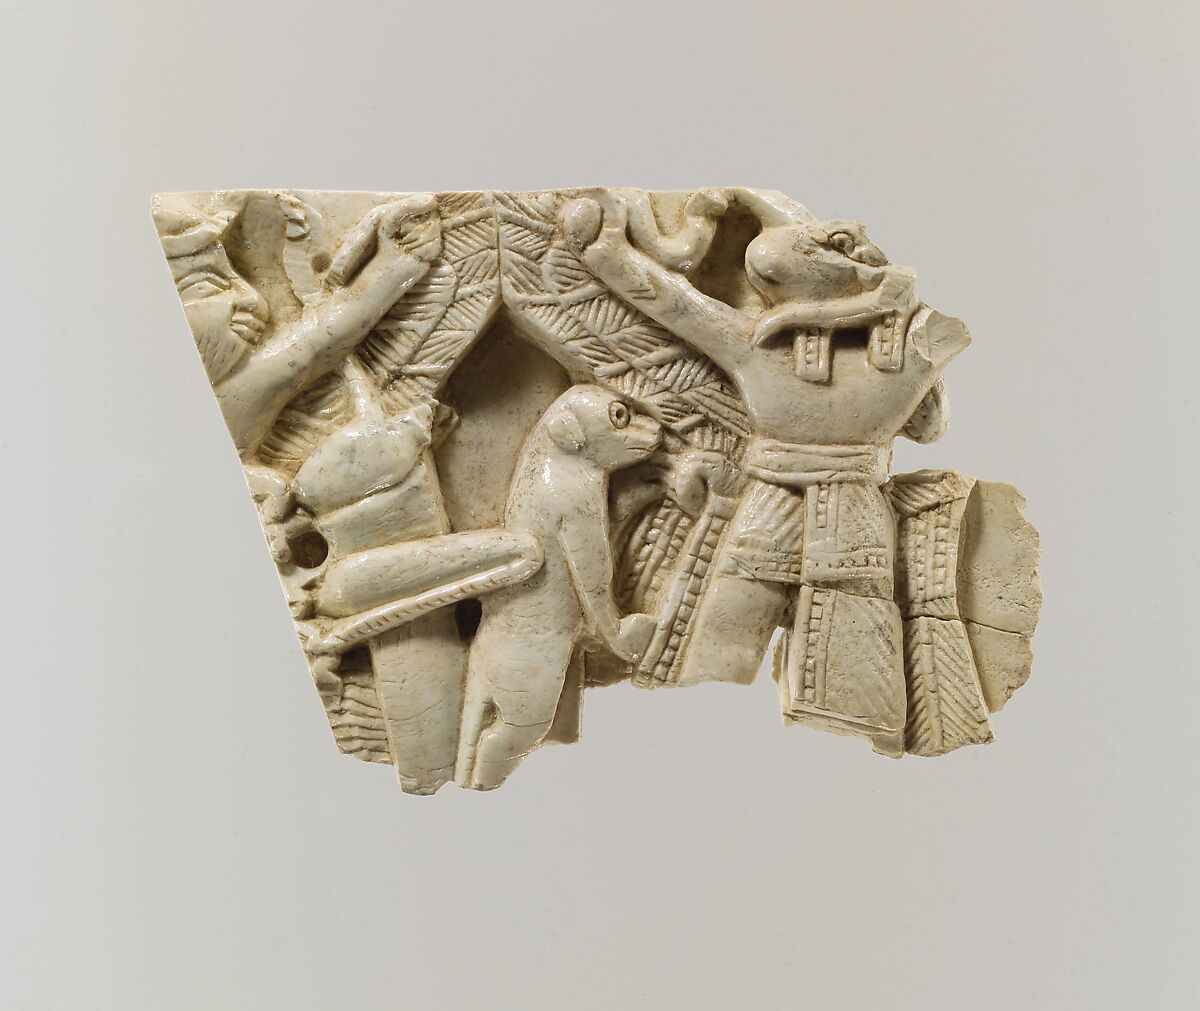 Furniture plaque carved in relief with winged figures, locust, and monkey, Ivory, Assyrian 